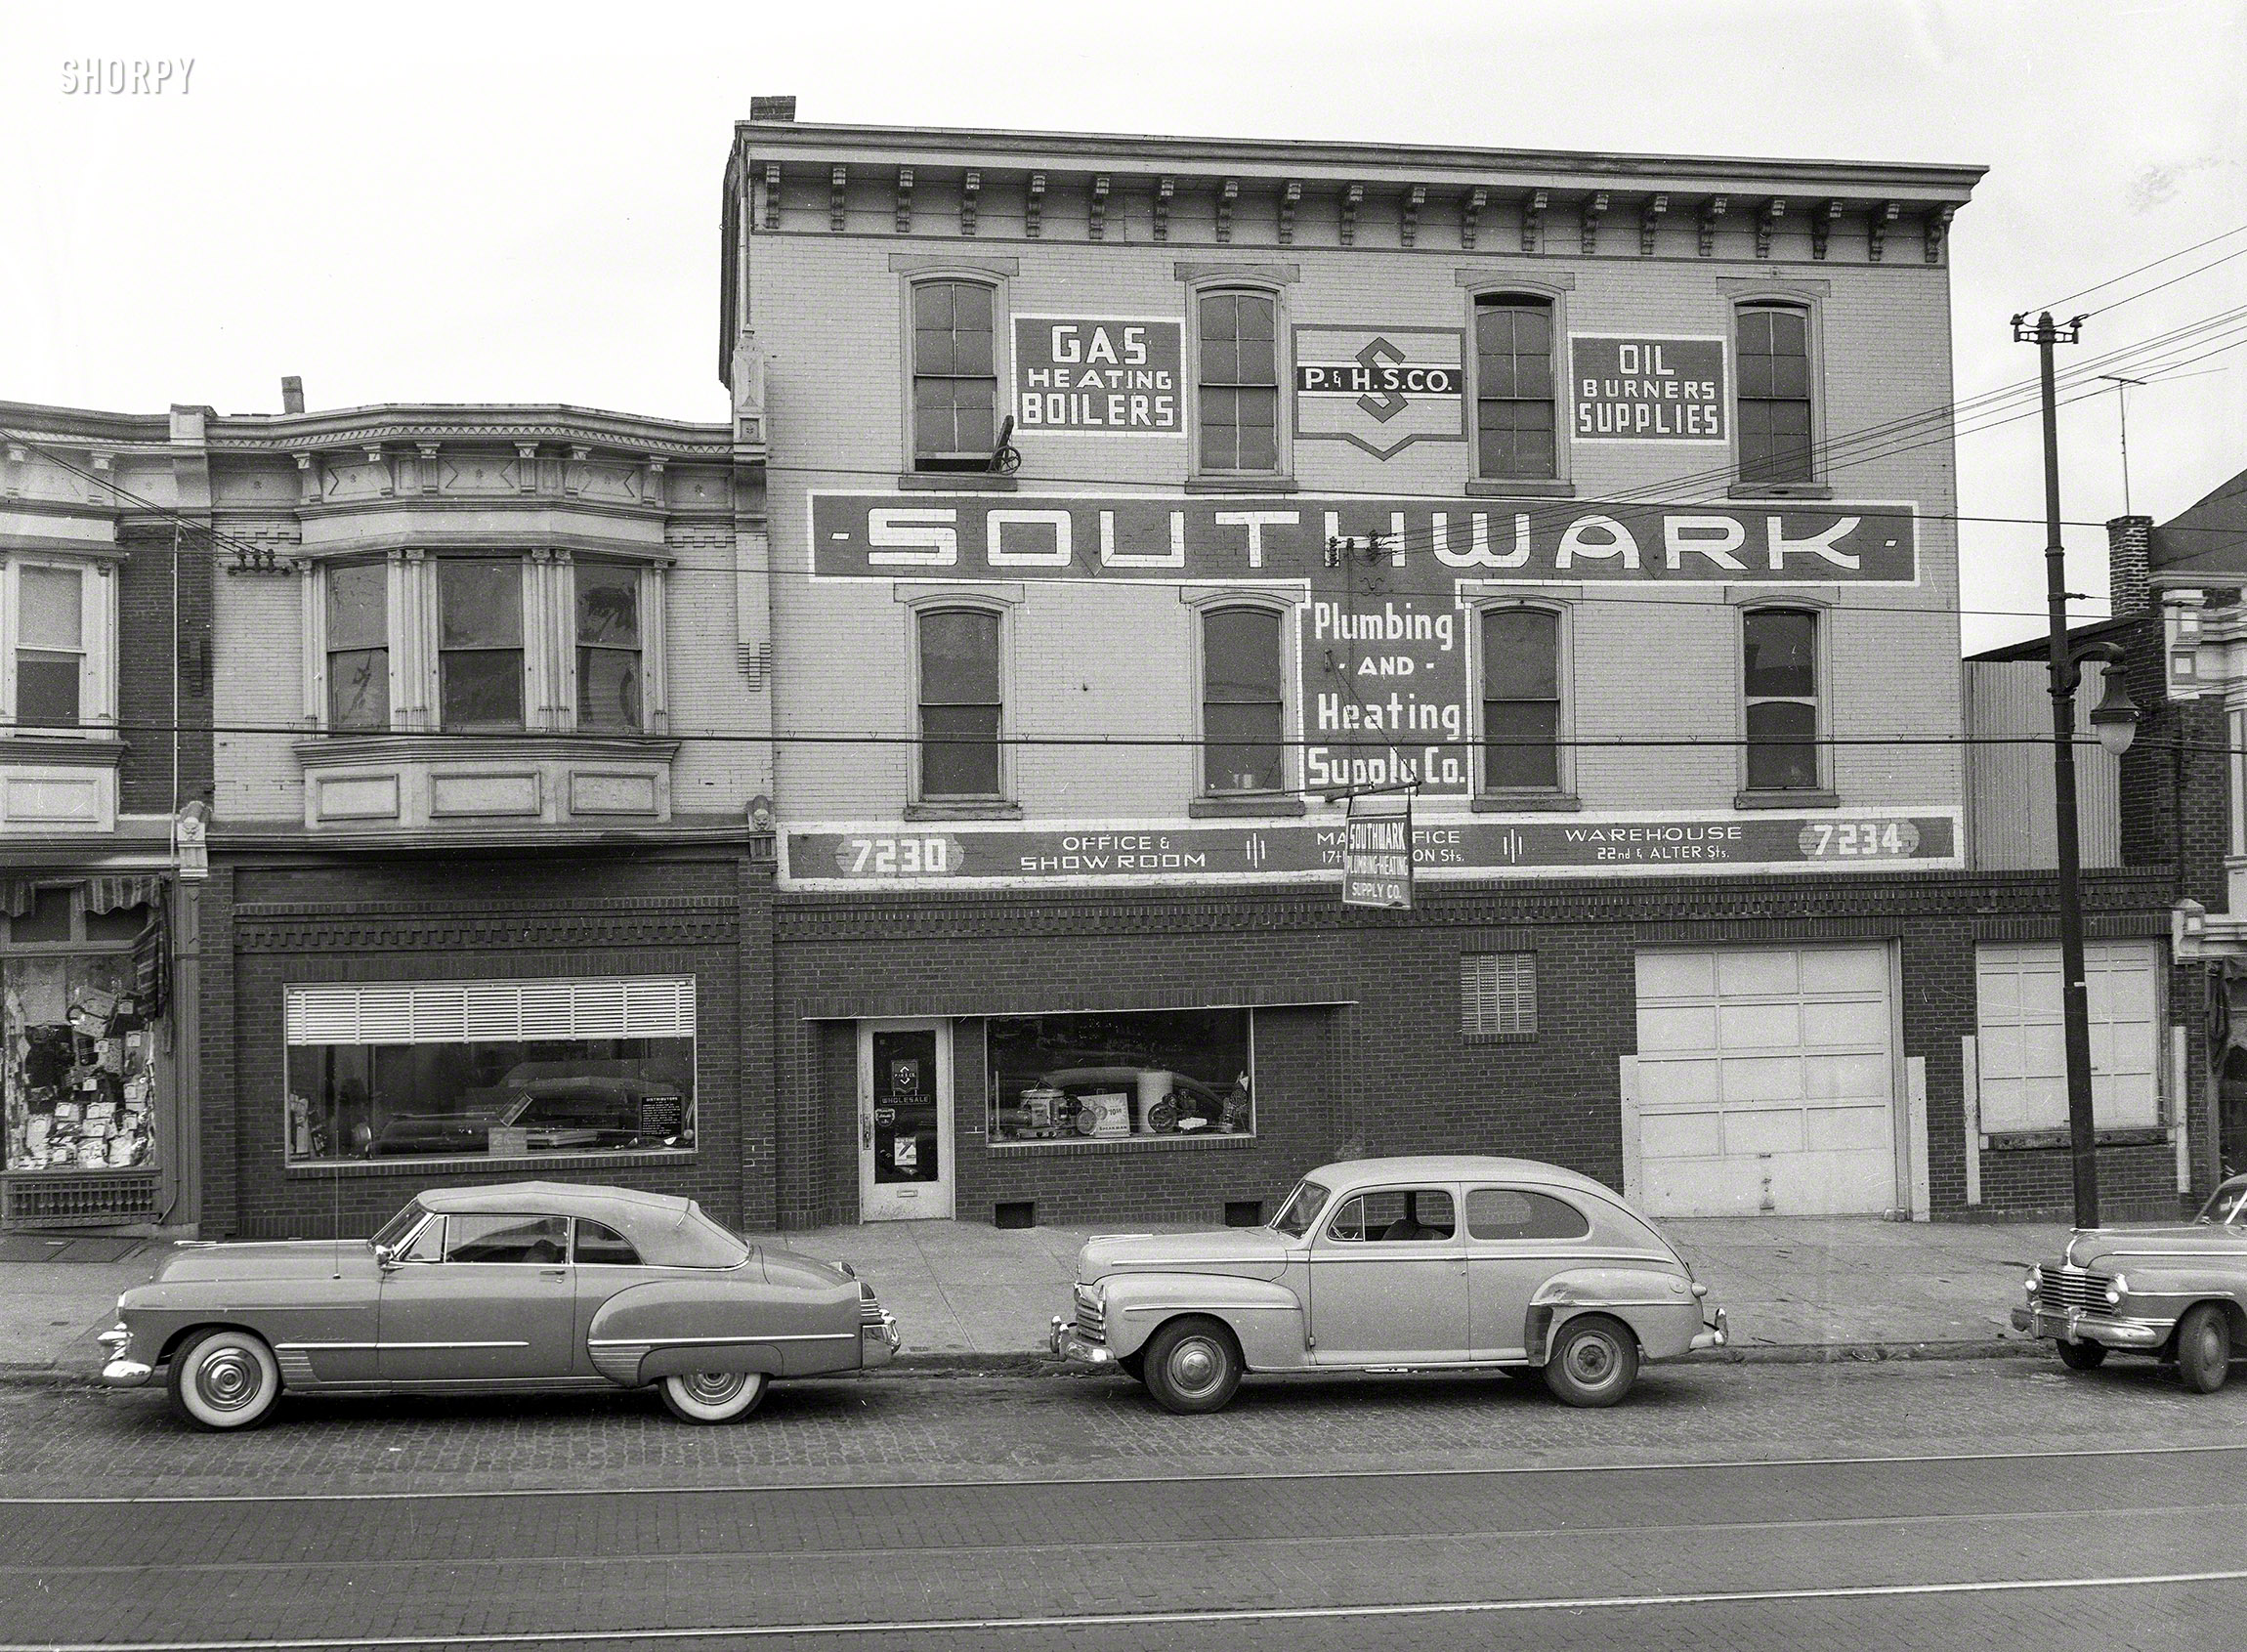 "Southwark Plumbing & Heating Supply, Philadelphia, 1949." 4x5 acetate negative from the archives of Signal Corps photographer Lt. Joseph Zinni. View full size.